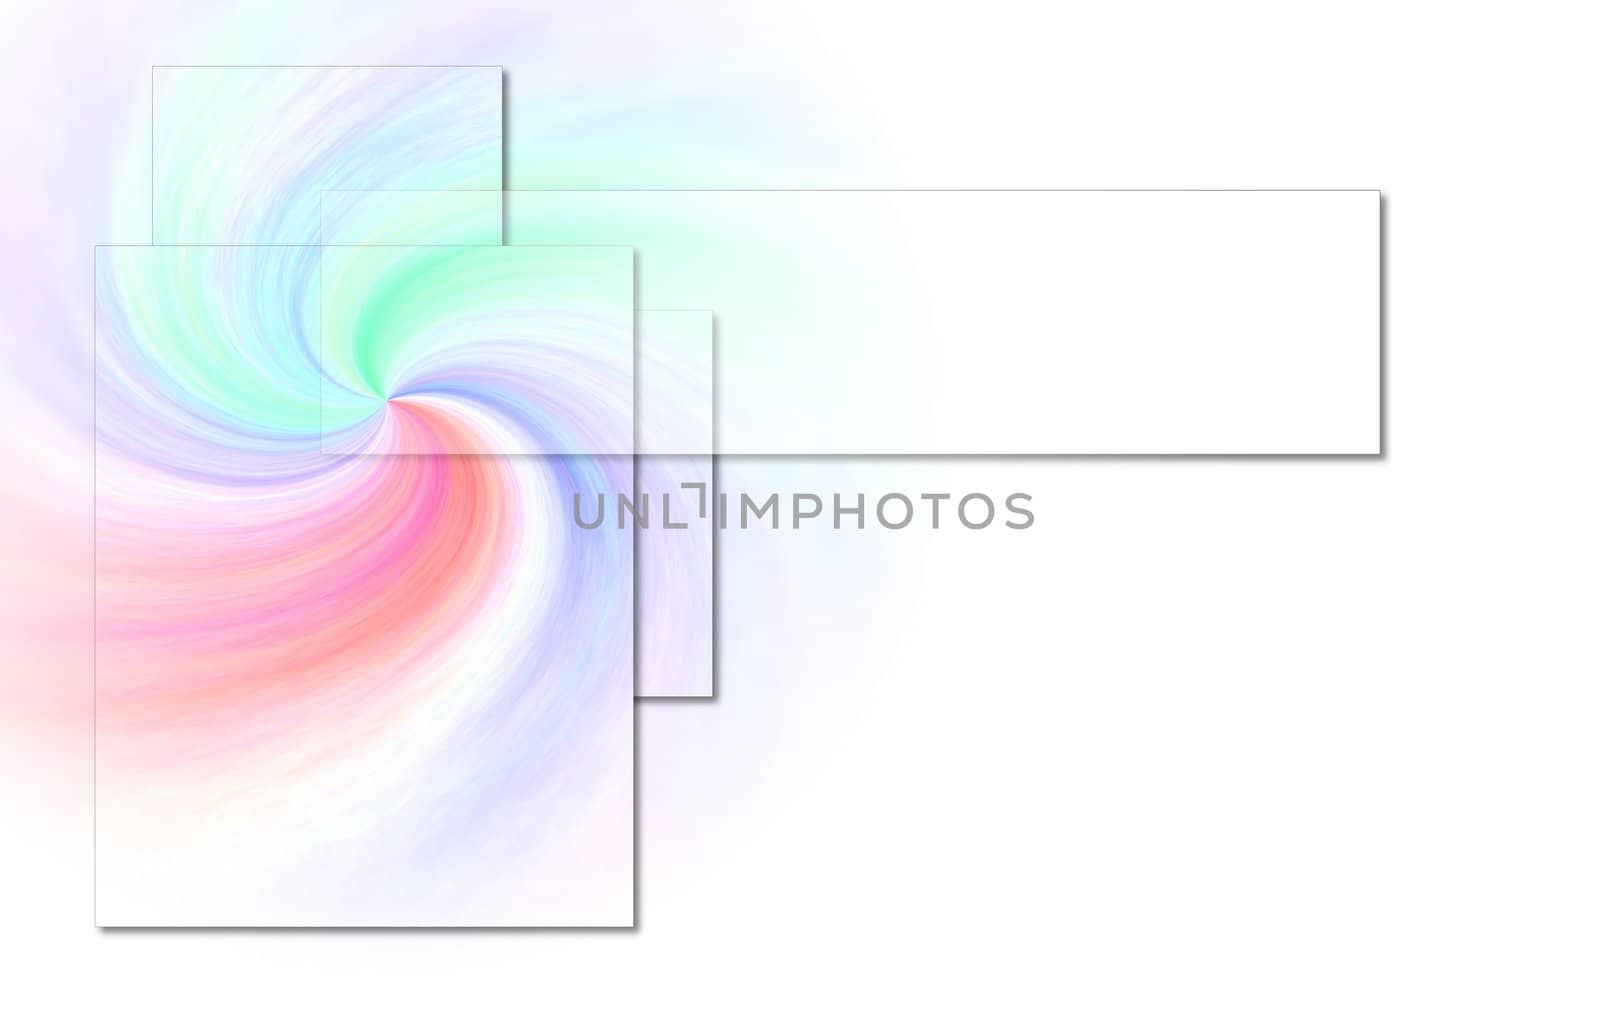 background with a colorful swirl and frames